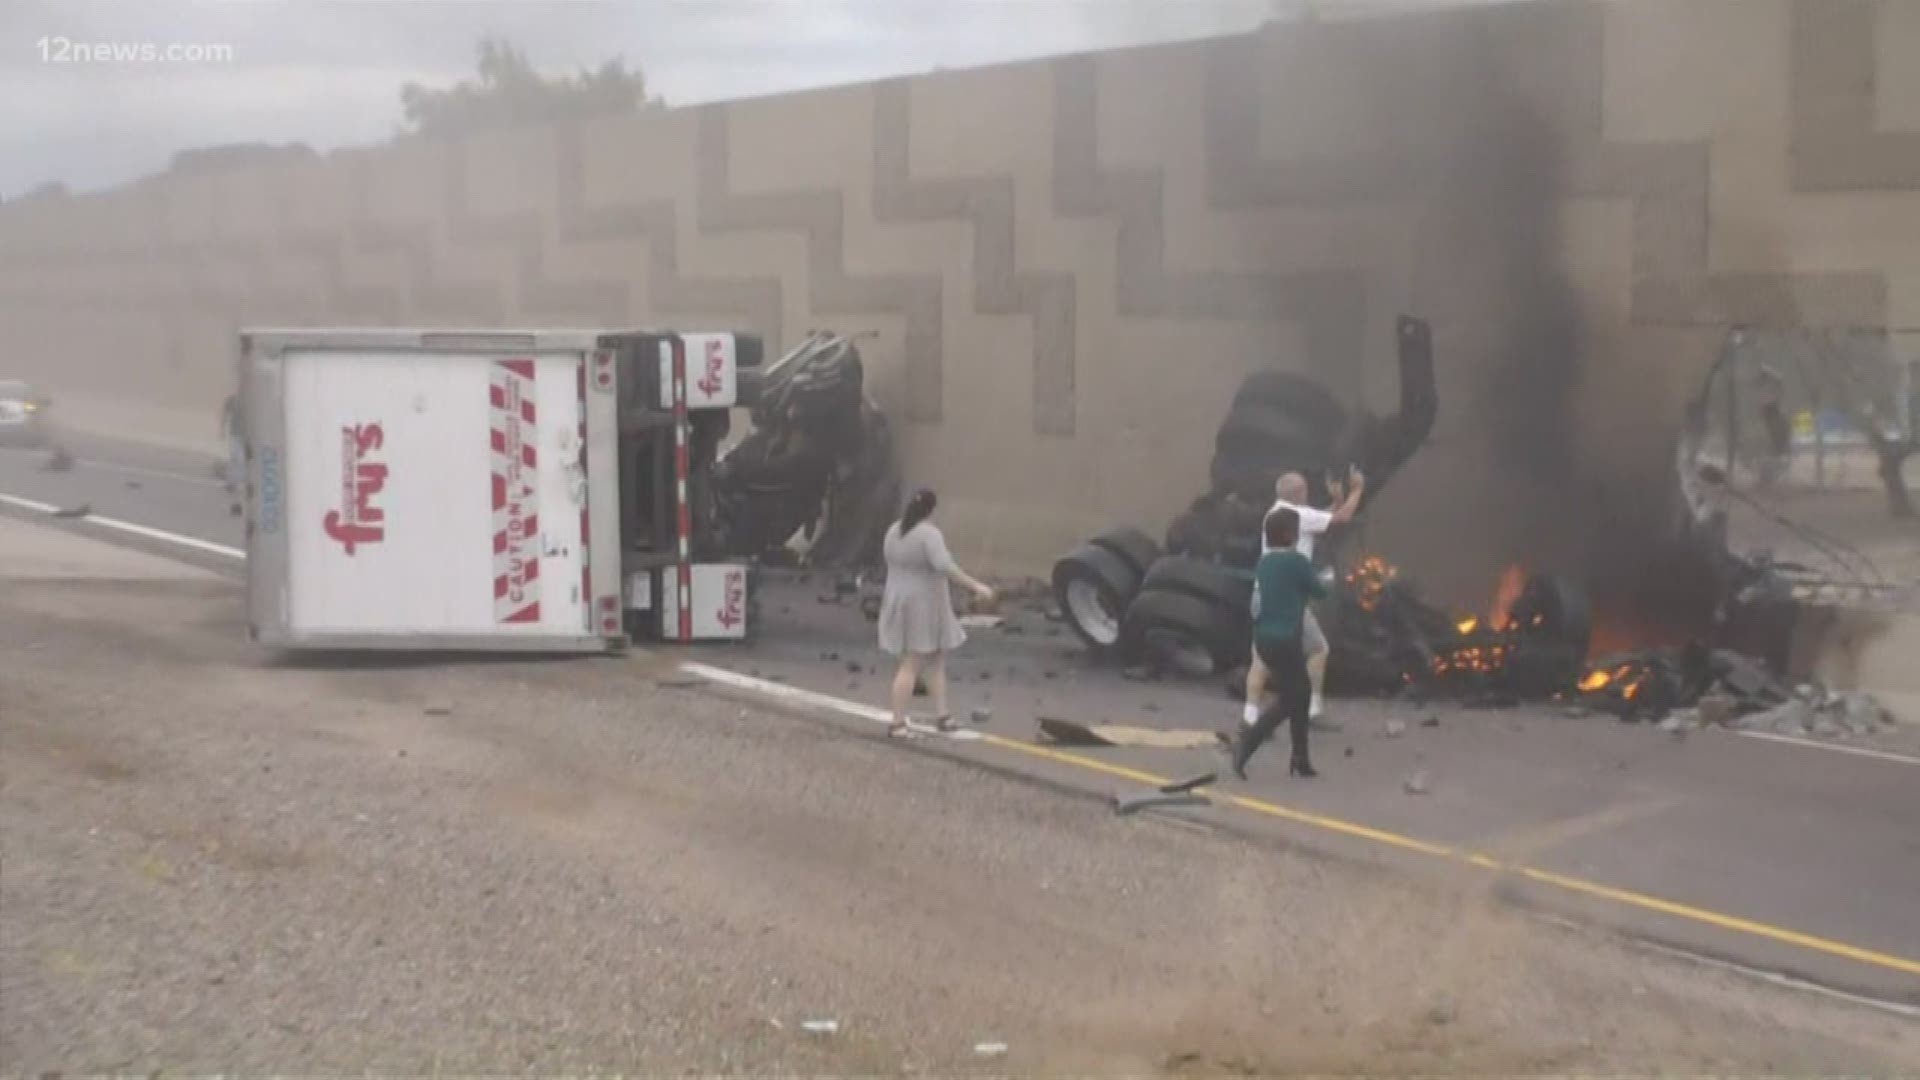 Several bystanders tried to help the driver after a semi-truck crashed on Loop 101 Agua Fria near Peoria Avenue.